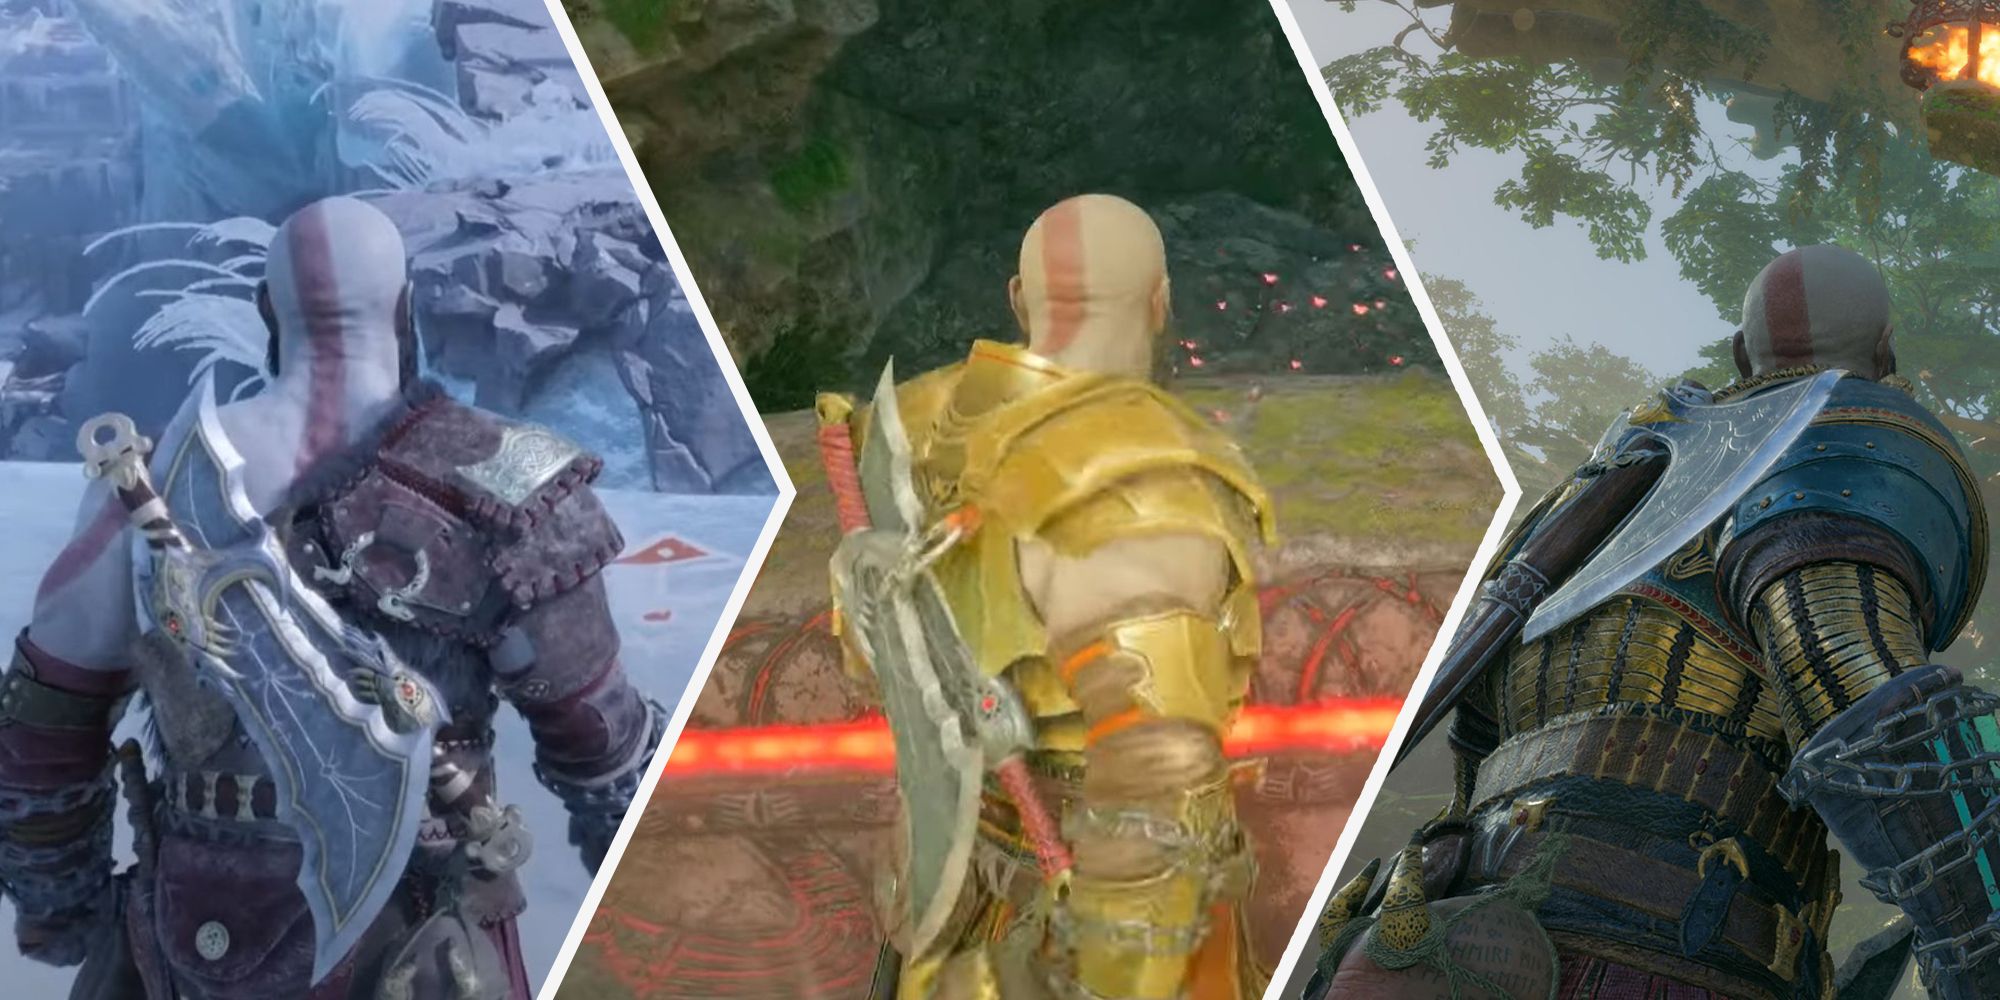 Split image with three photos of Kratos in different areas. The left photo is Kratos in the Realm Between Realms, the middle is Kratos opening a chest in Vanaheim, and the right is Kratos looking at two braziers in Vanaheim.